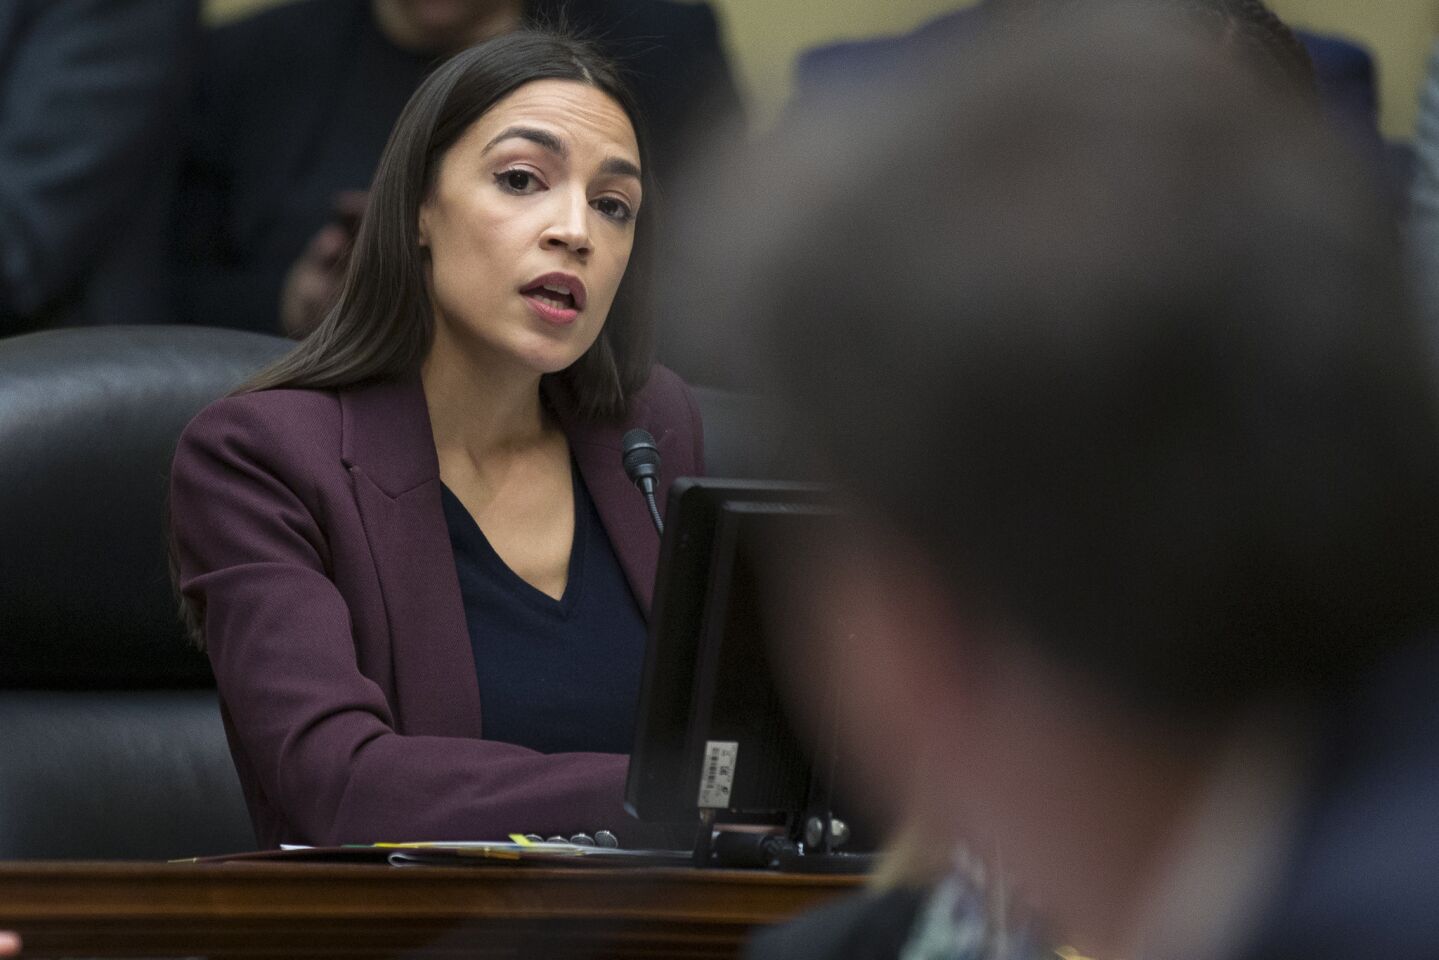 Rep. Alexandria Ocasio-Cortez, (D-N.Y.) questions Michael Cohen as he testifies before the House Oversight and Reform Committee.